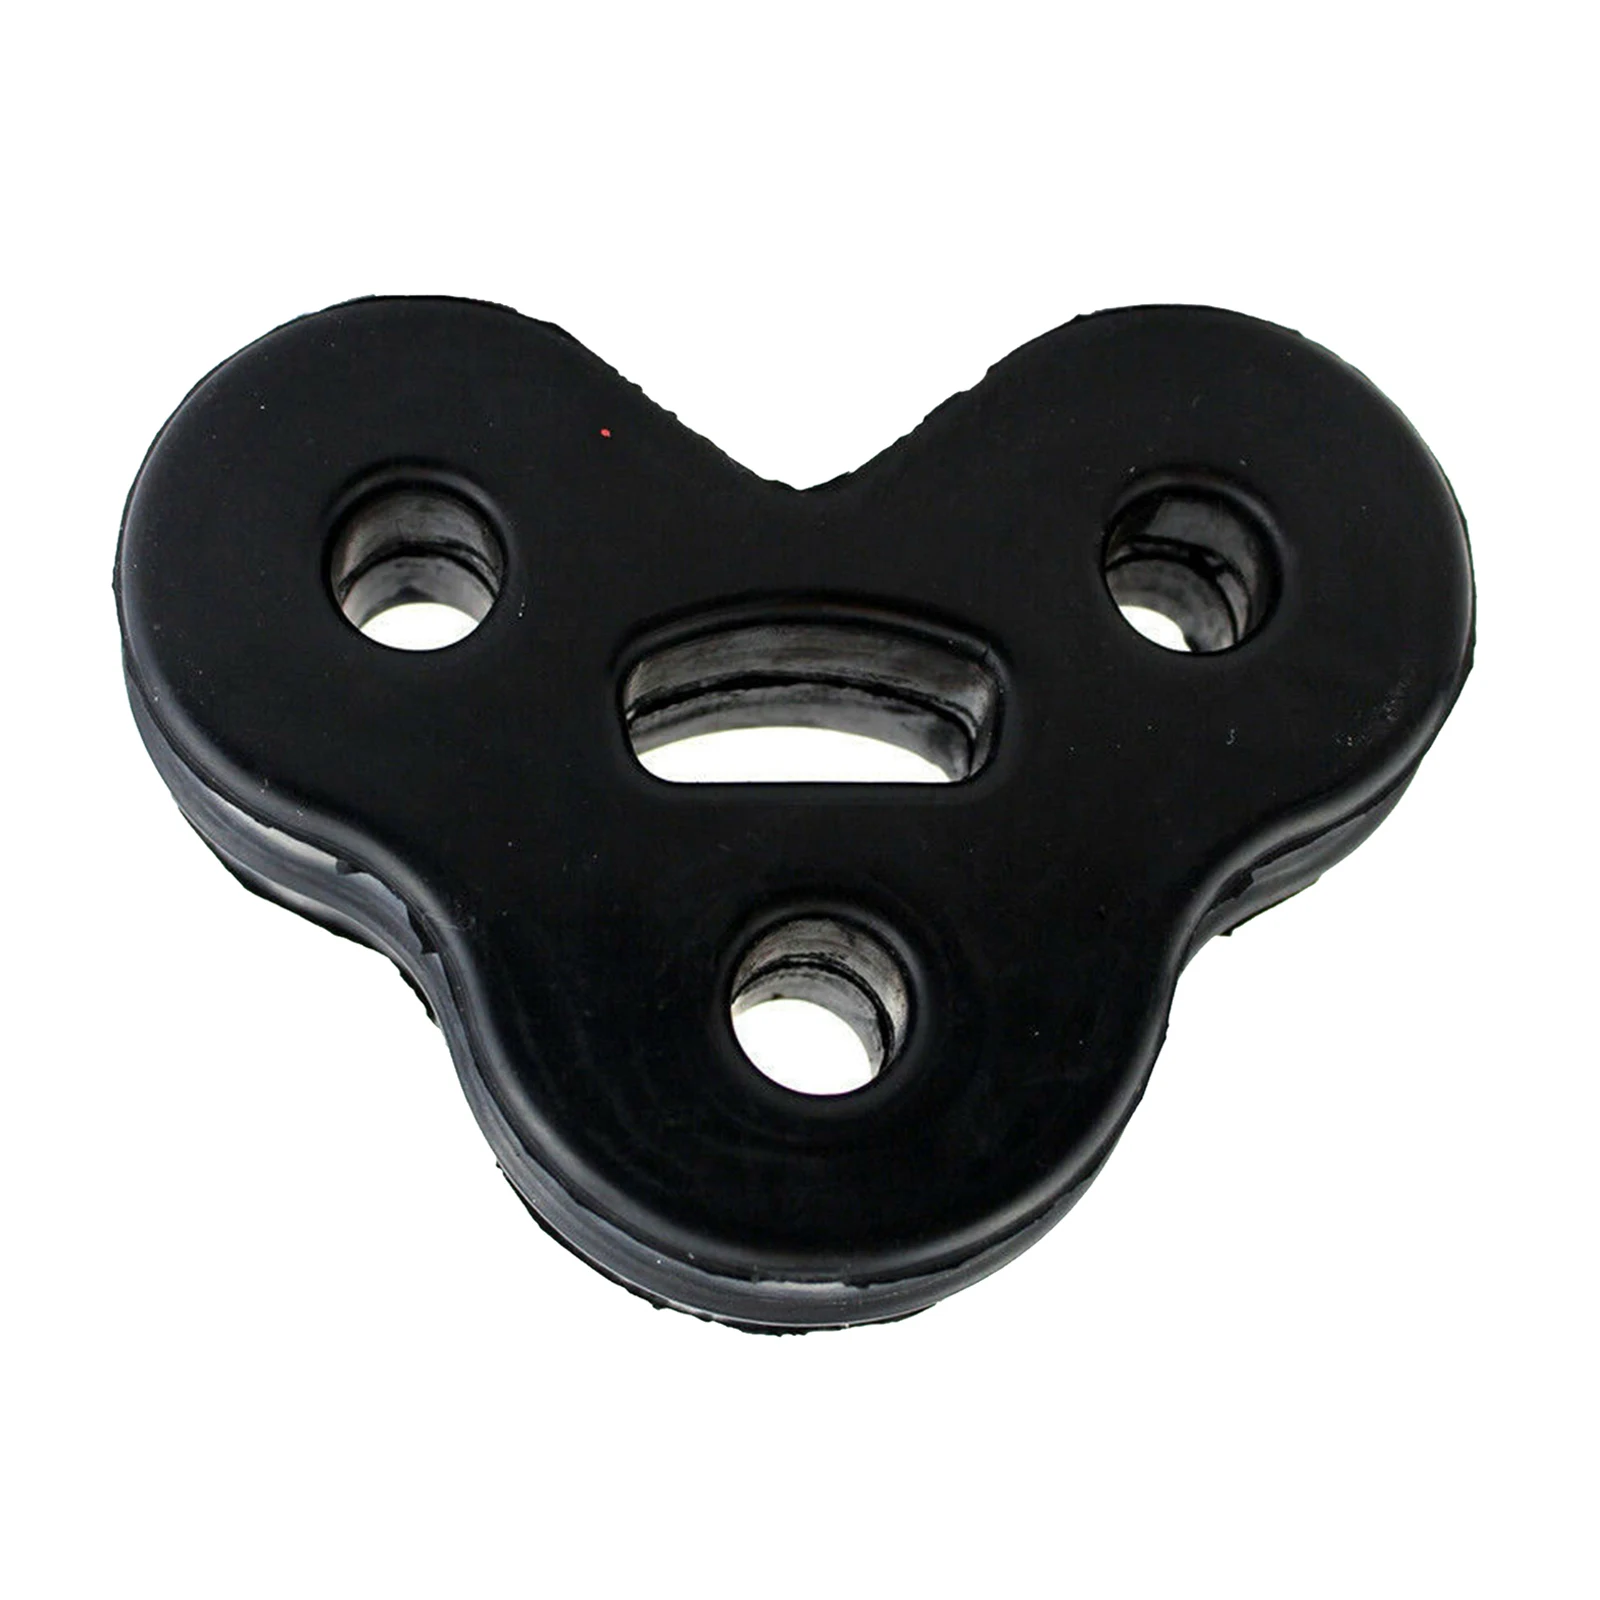 Exhaust Hanger Pipe Rear Mount Bracket Muffler Insulator Hanging Rubber Fit with 3 Holes for XJL XF LJ C2C32948 